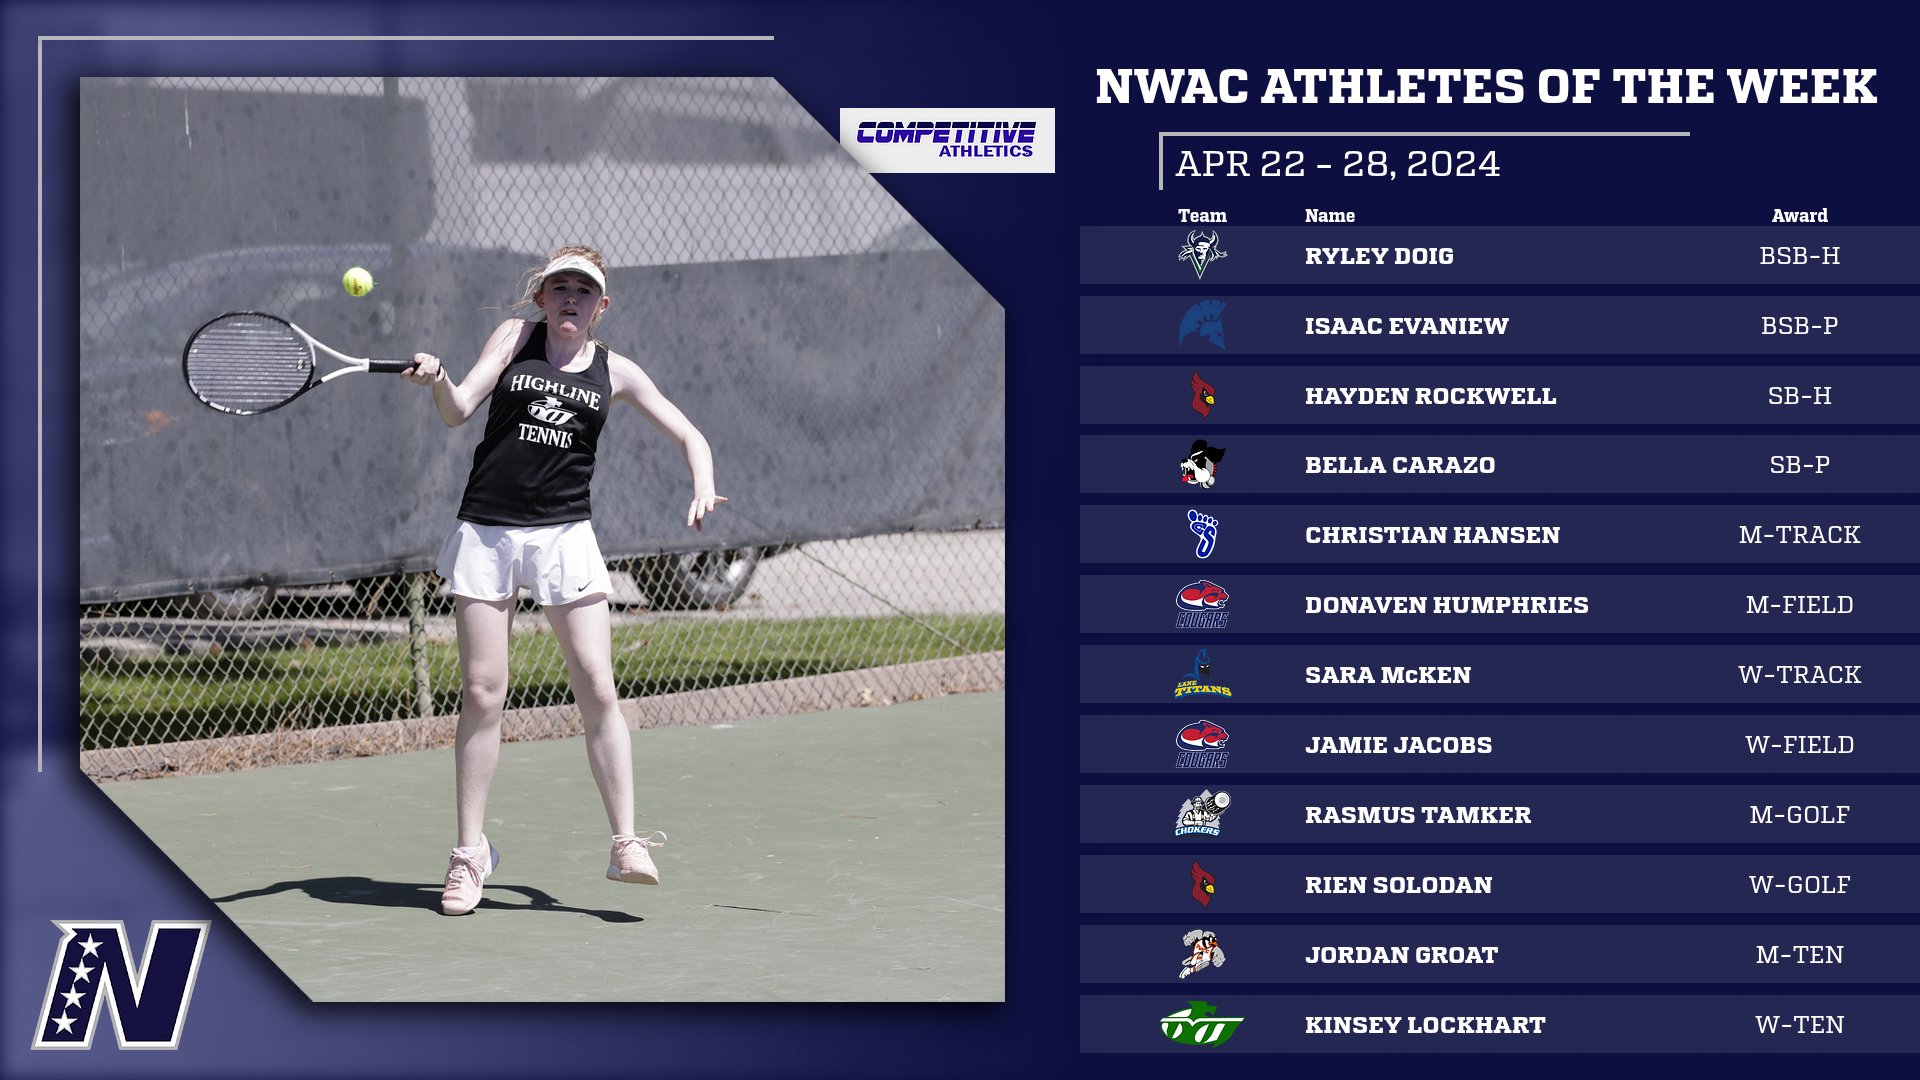 Competitive Athletics NWAC Athletes of the Week: April 22 - 28